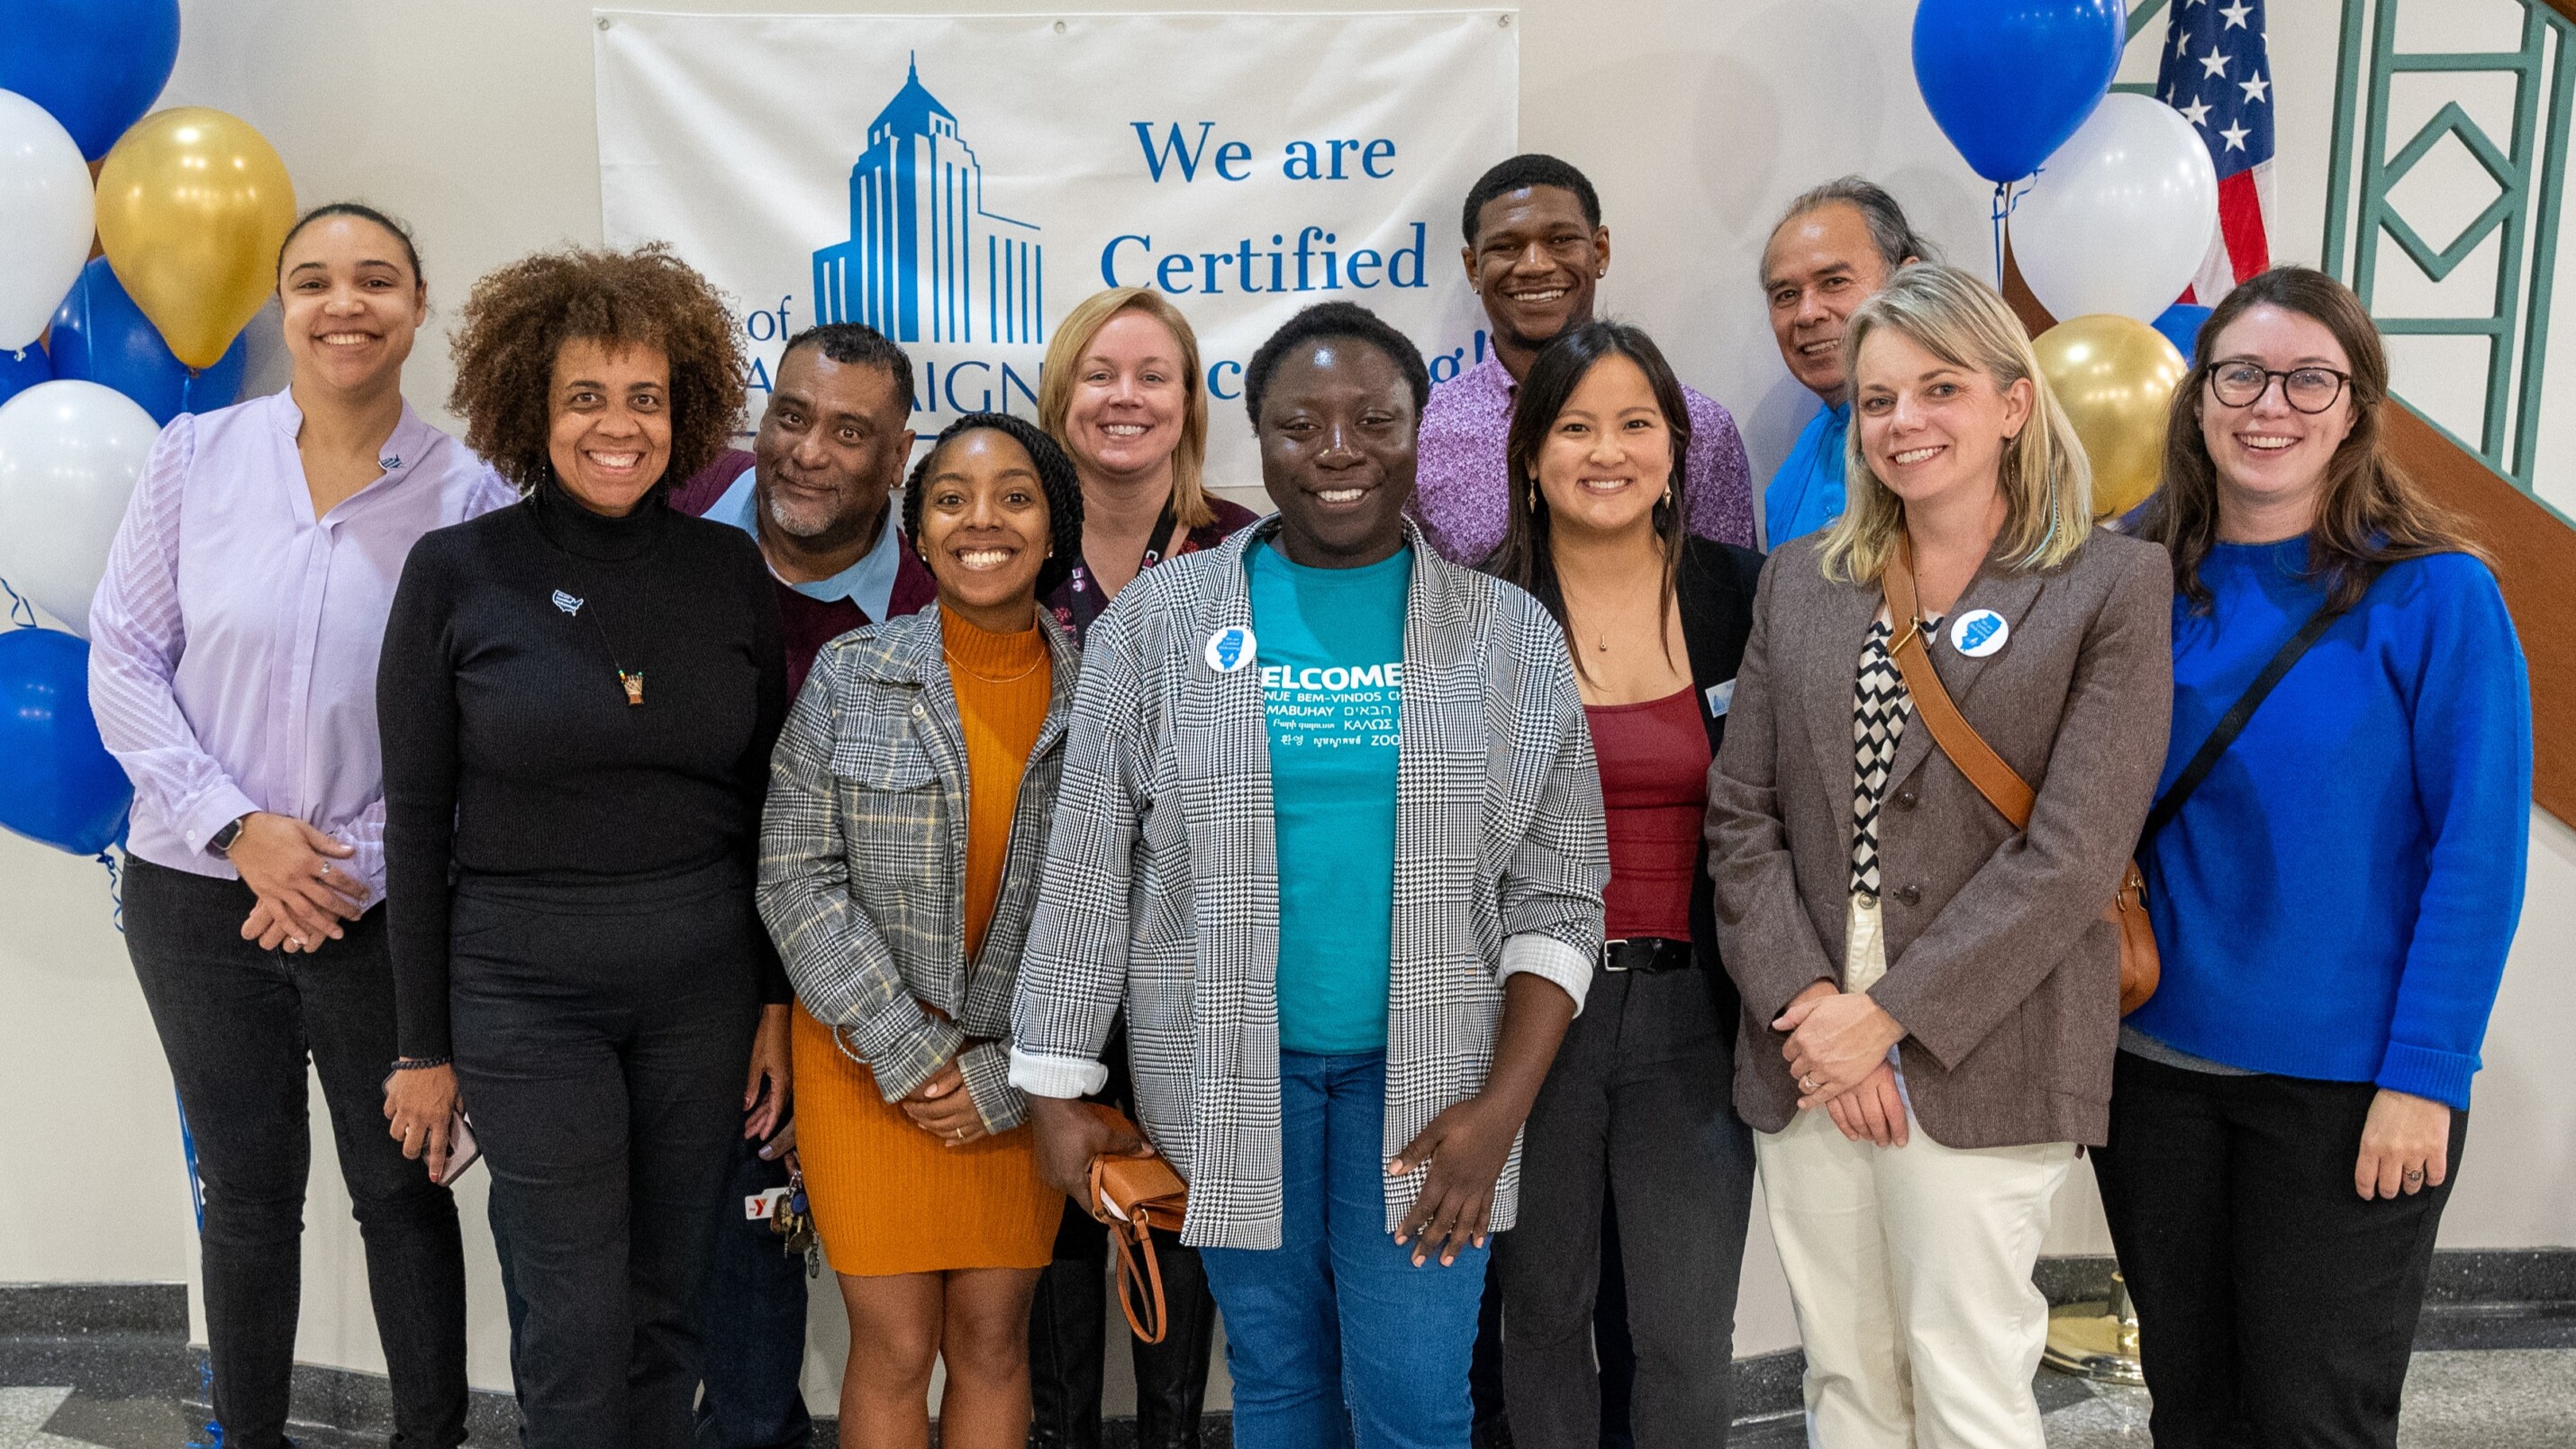 Group photo of partners in Champaign celebrating the announcement of their Certified Welcoming designation.